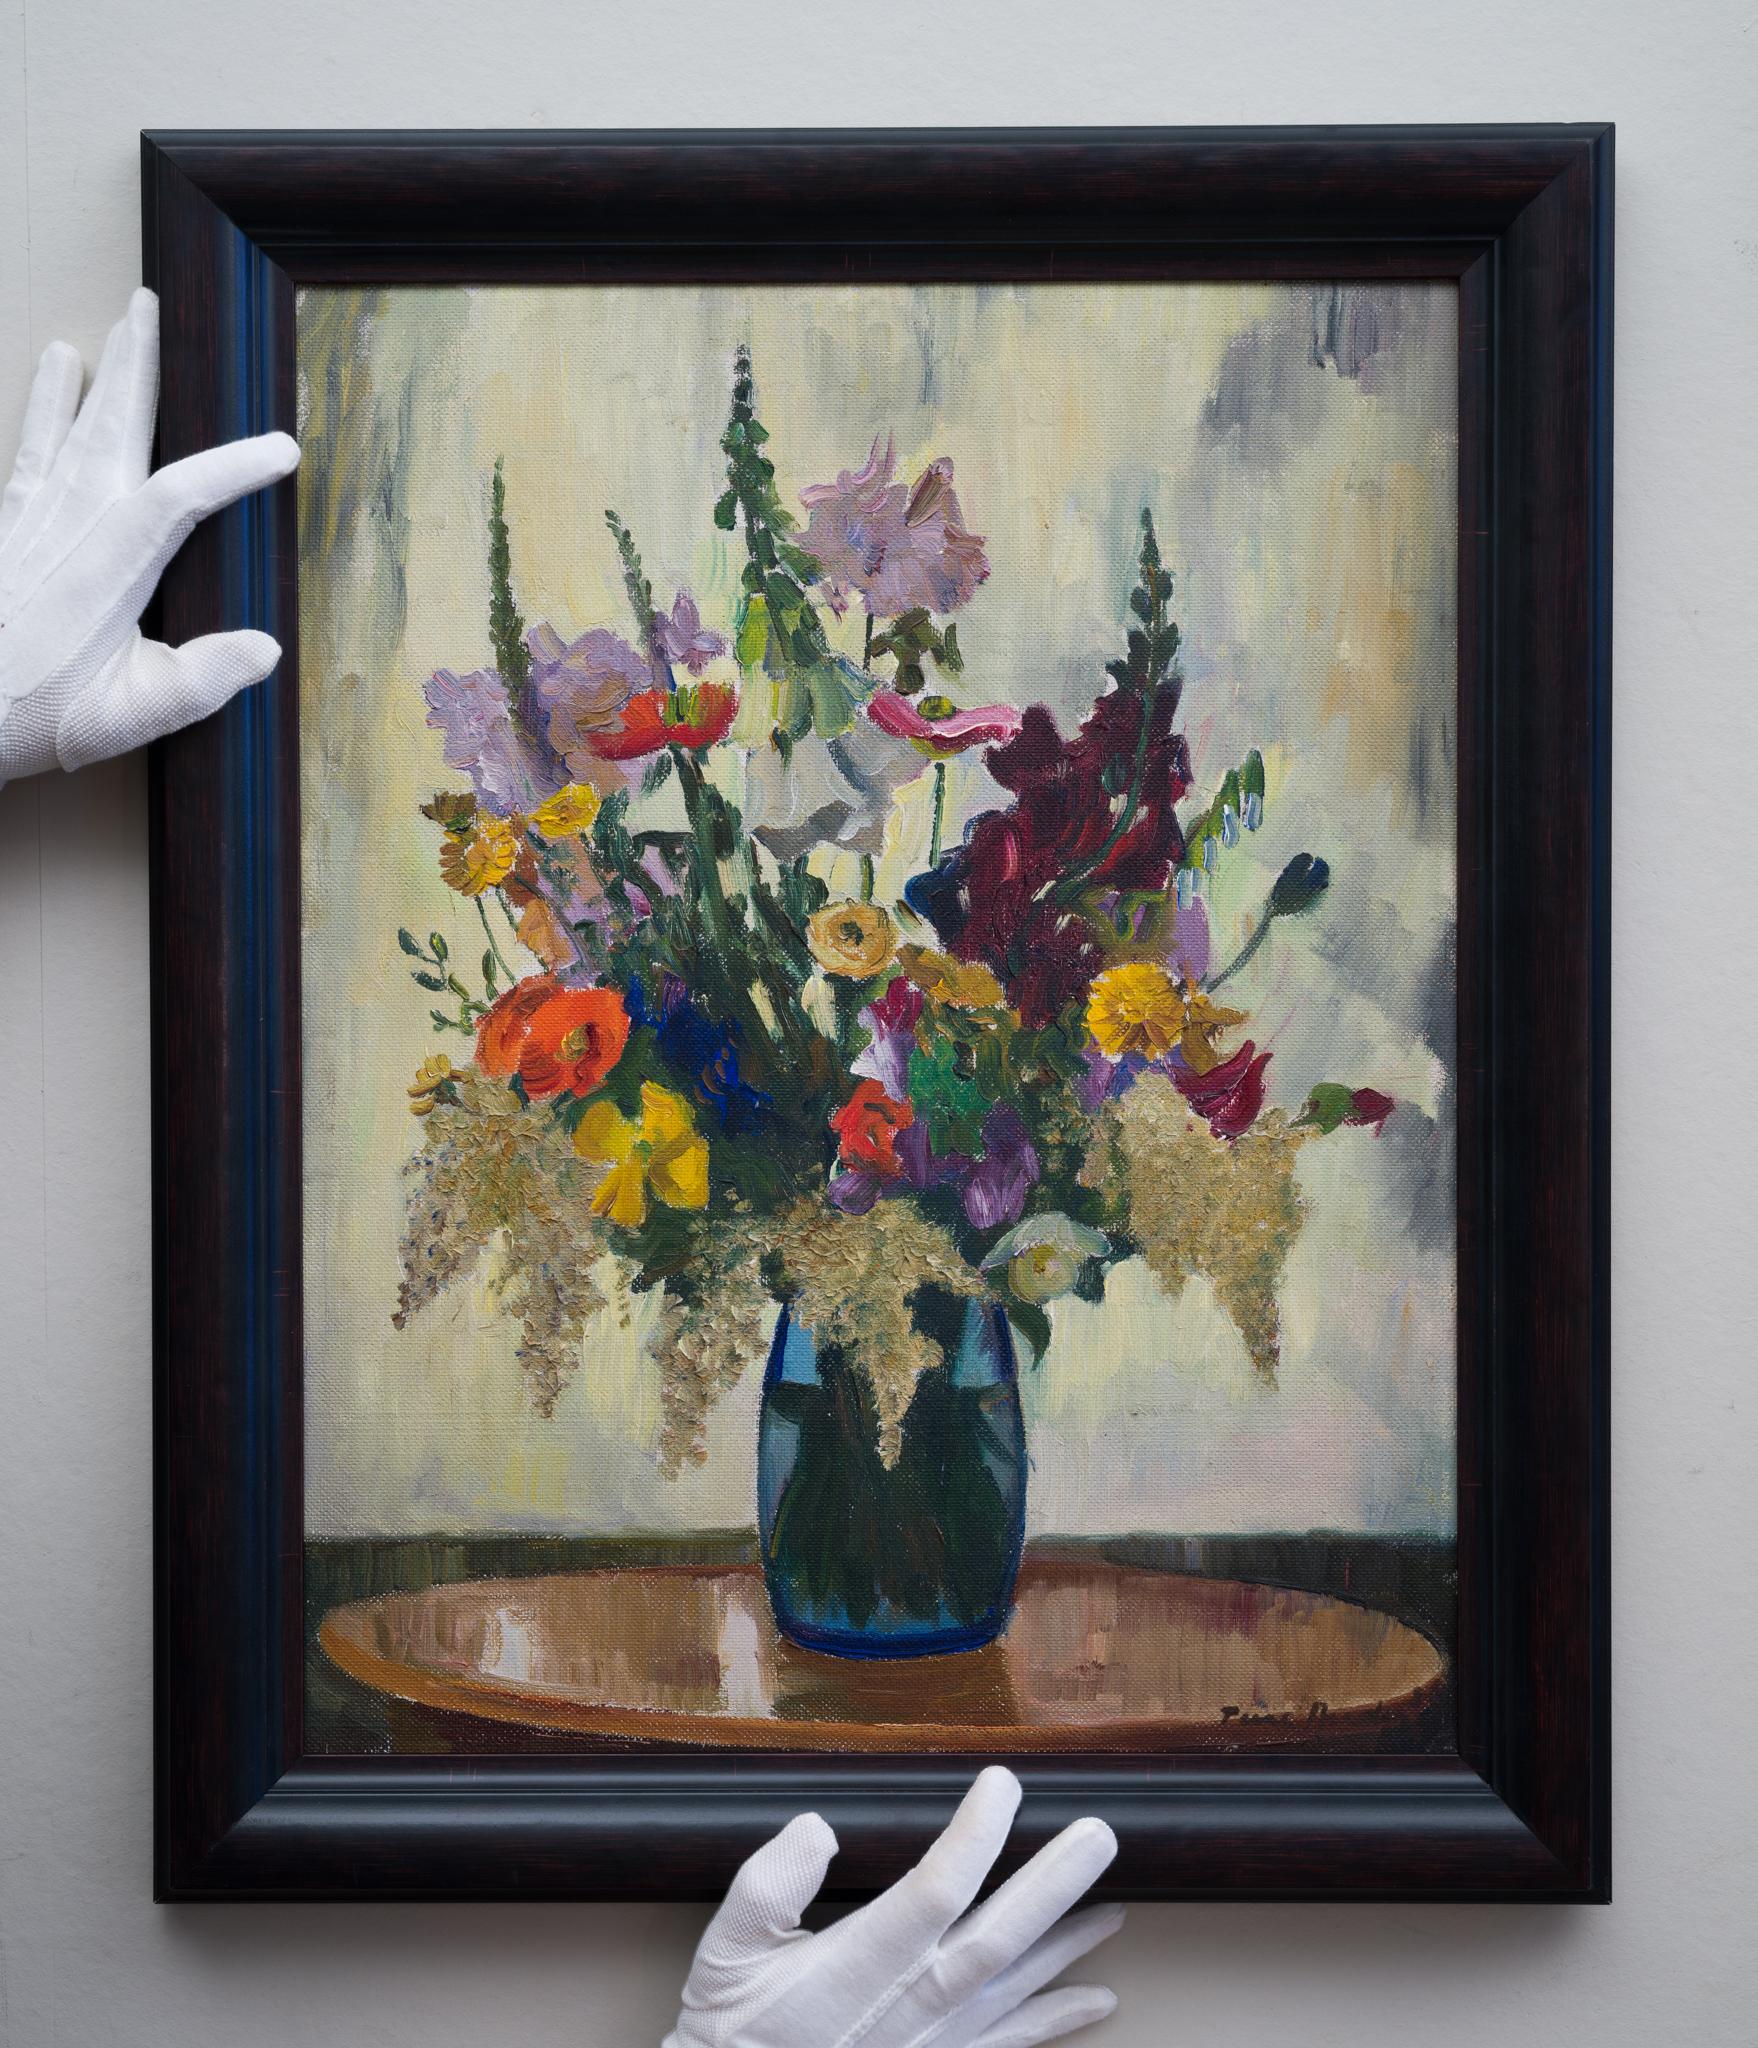 A Bouquet of Digitalis, Mohnblume, Iris, Snapdragons, Kornblume, Buttercup, 1936 (Moderne), Painting, von Ture Ander